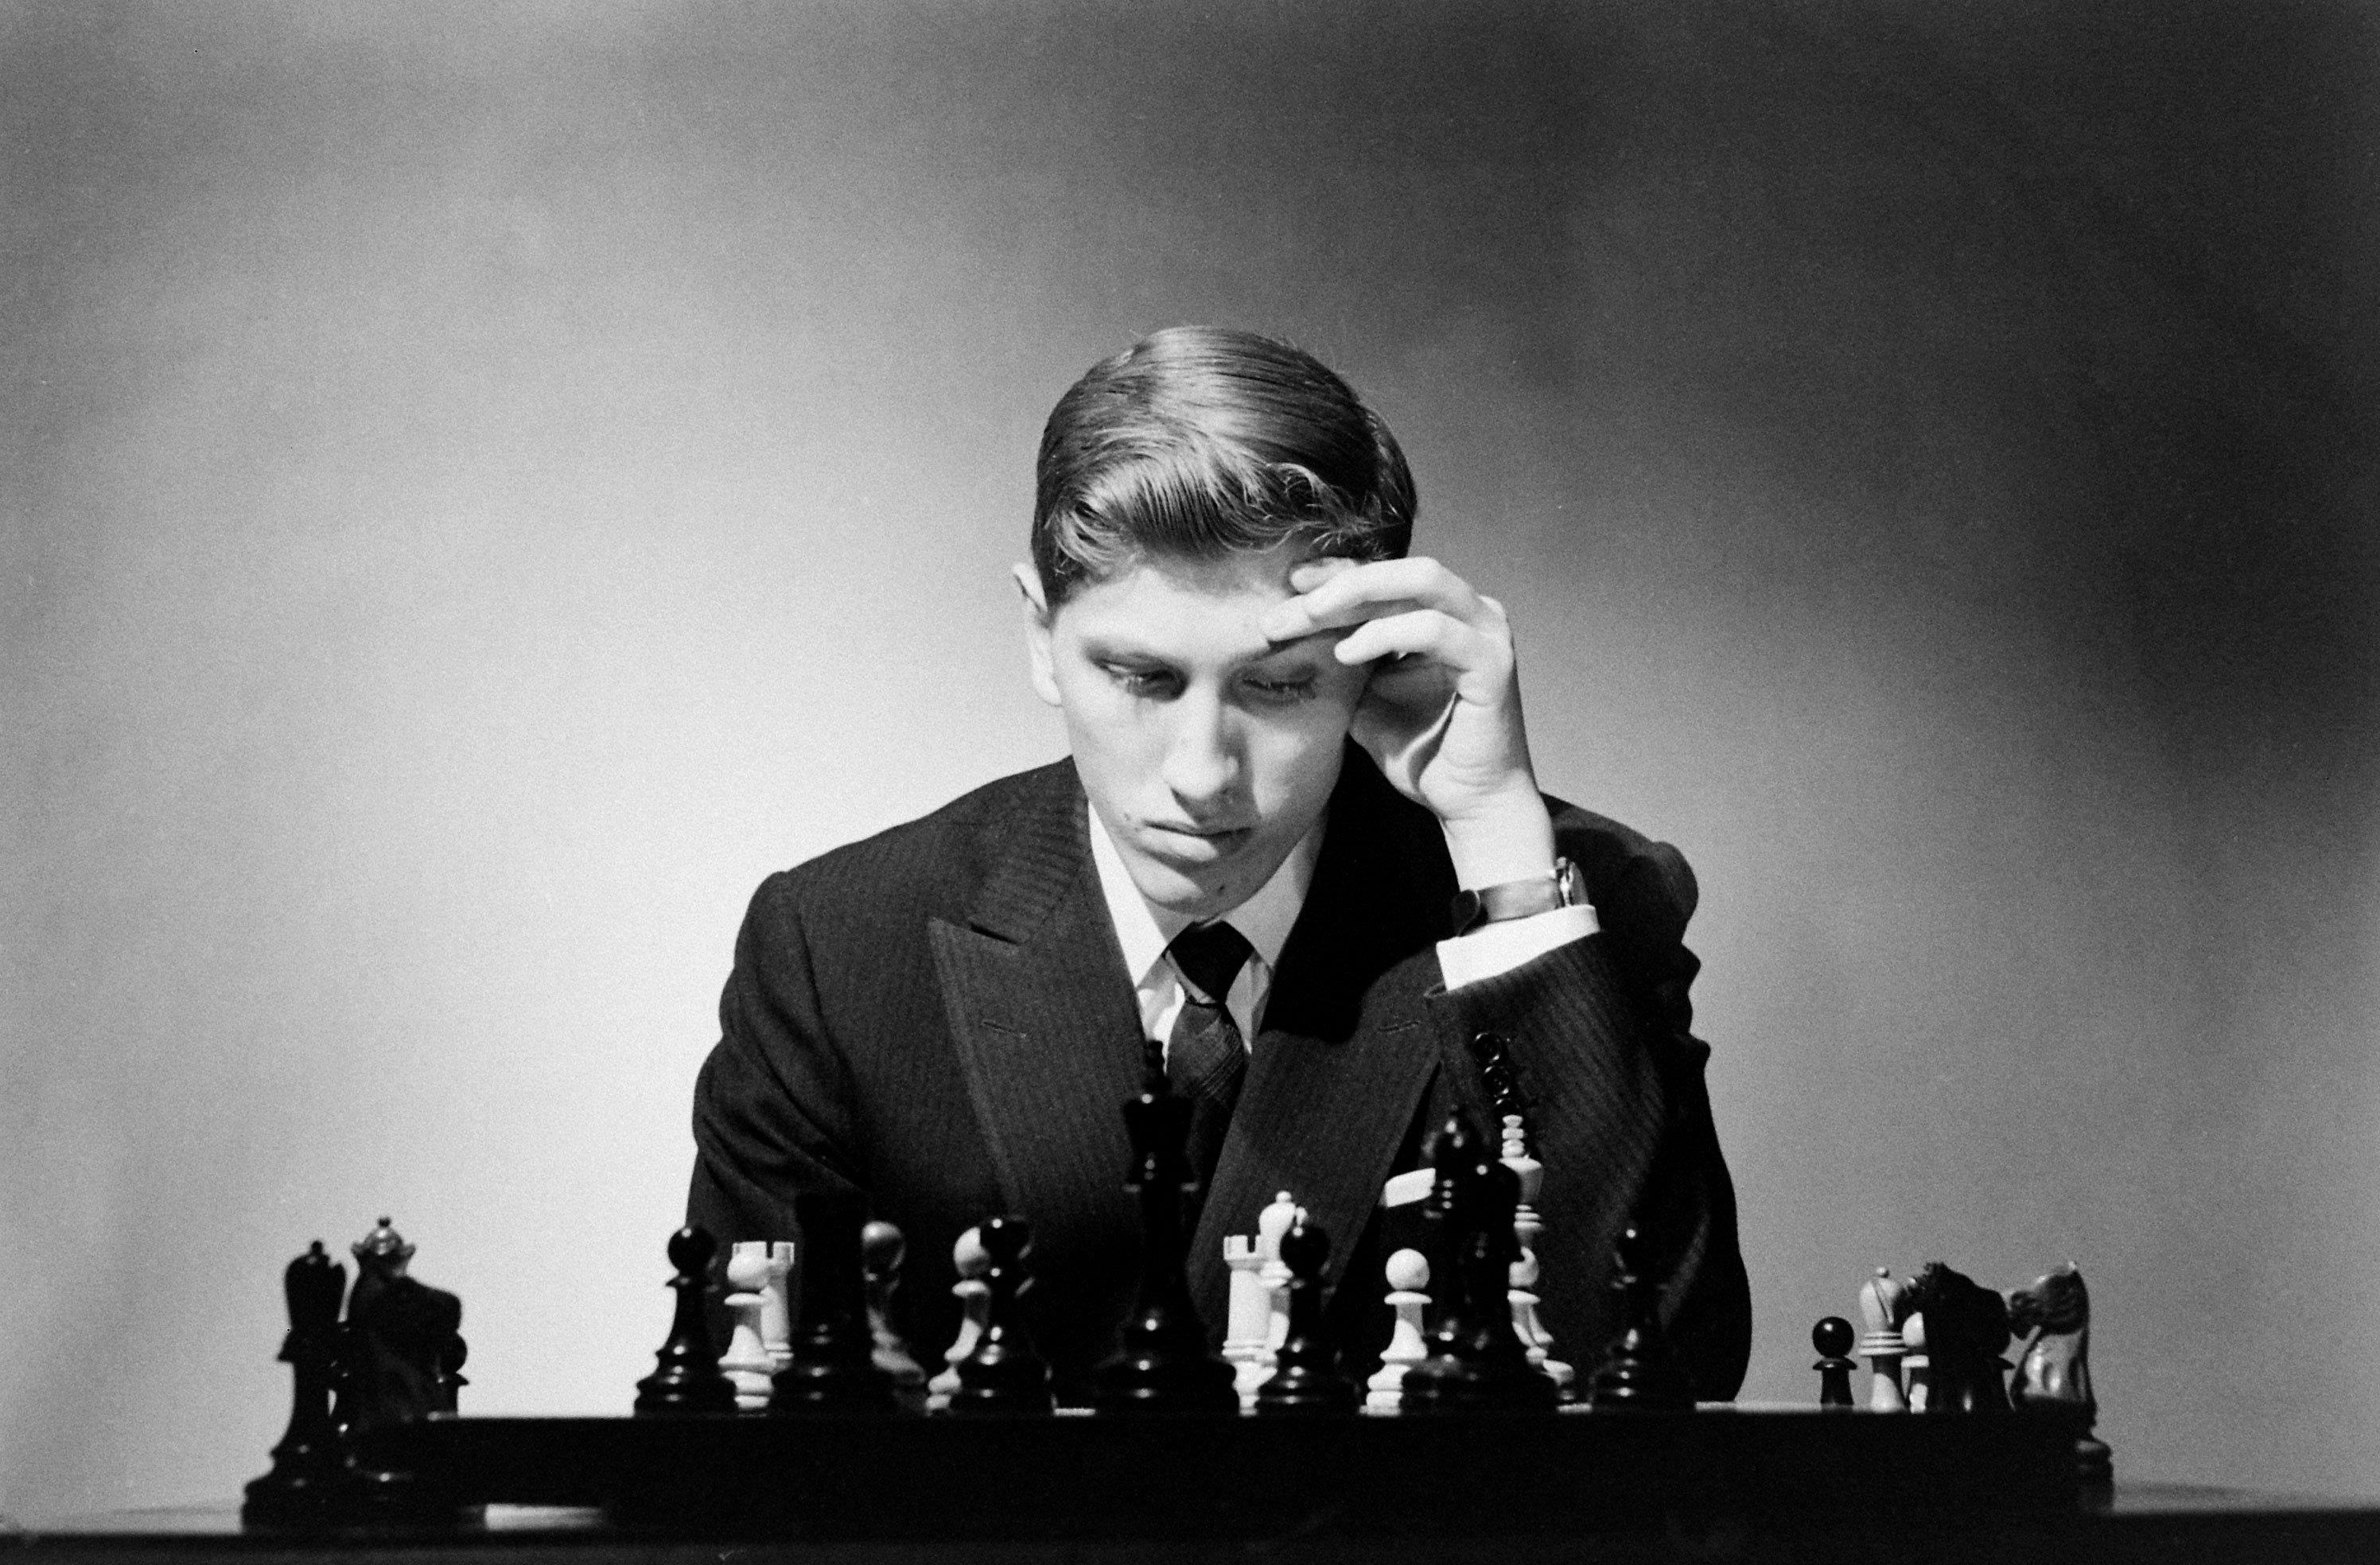 Top 5 best chess players ever - Woochess-Let's chess